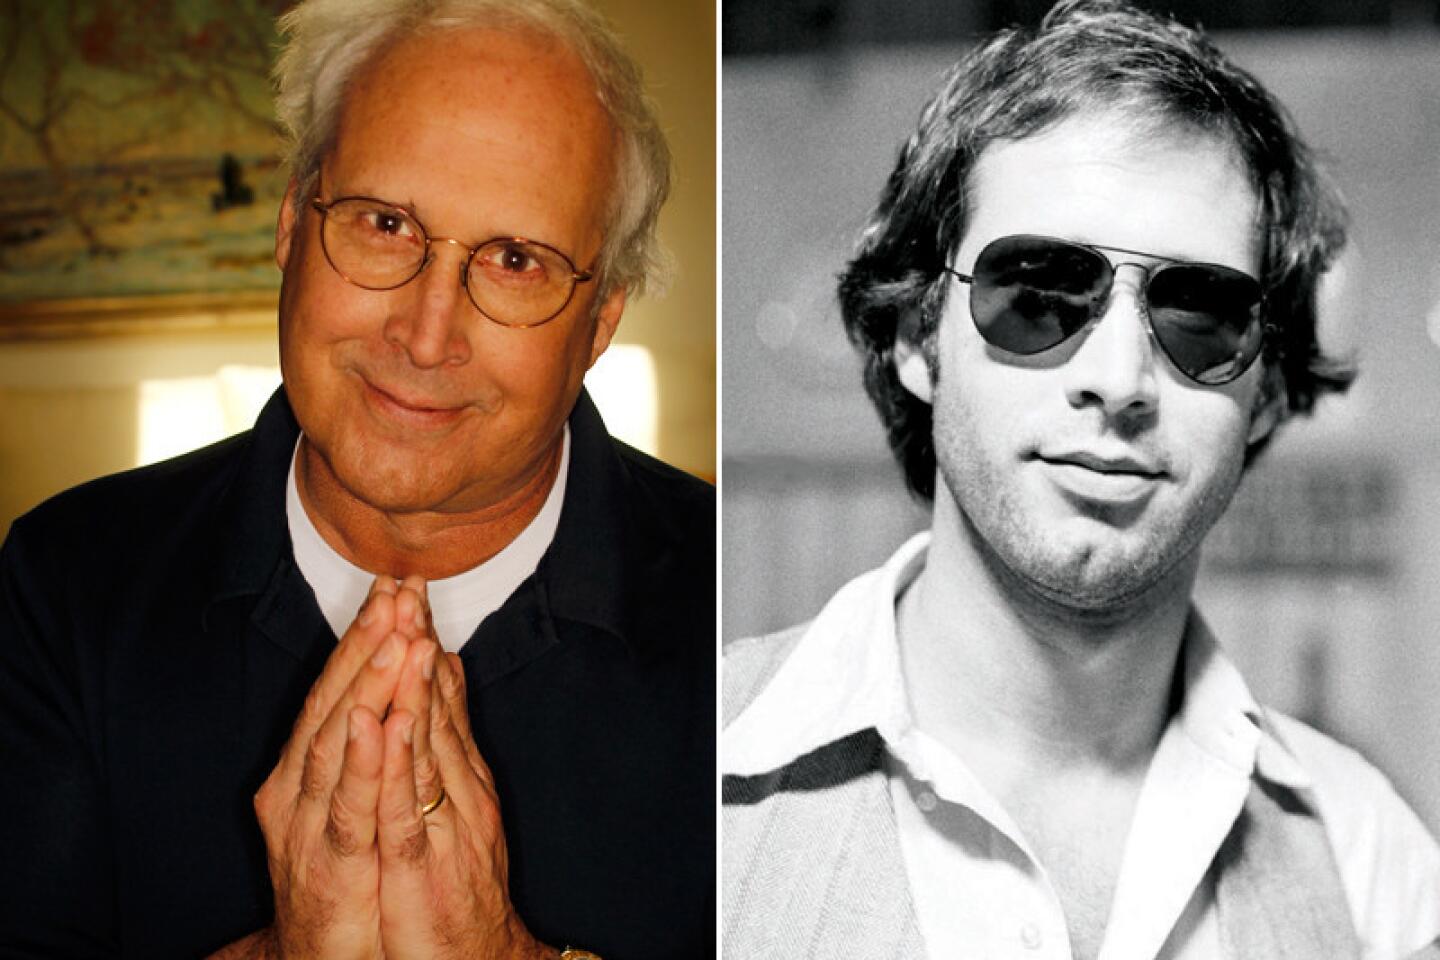 Chevy Chase (1975-76)